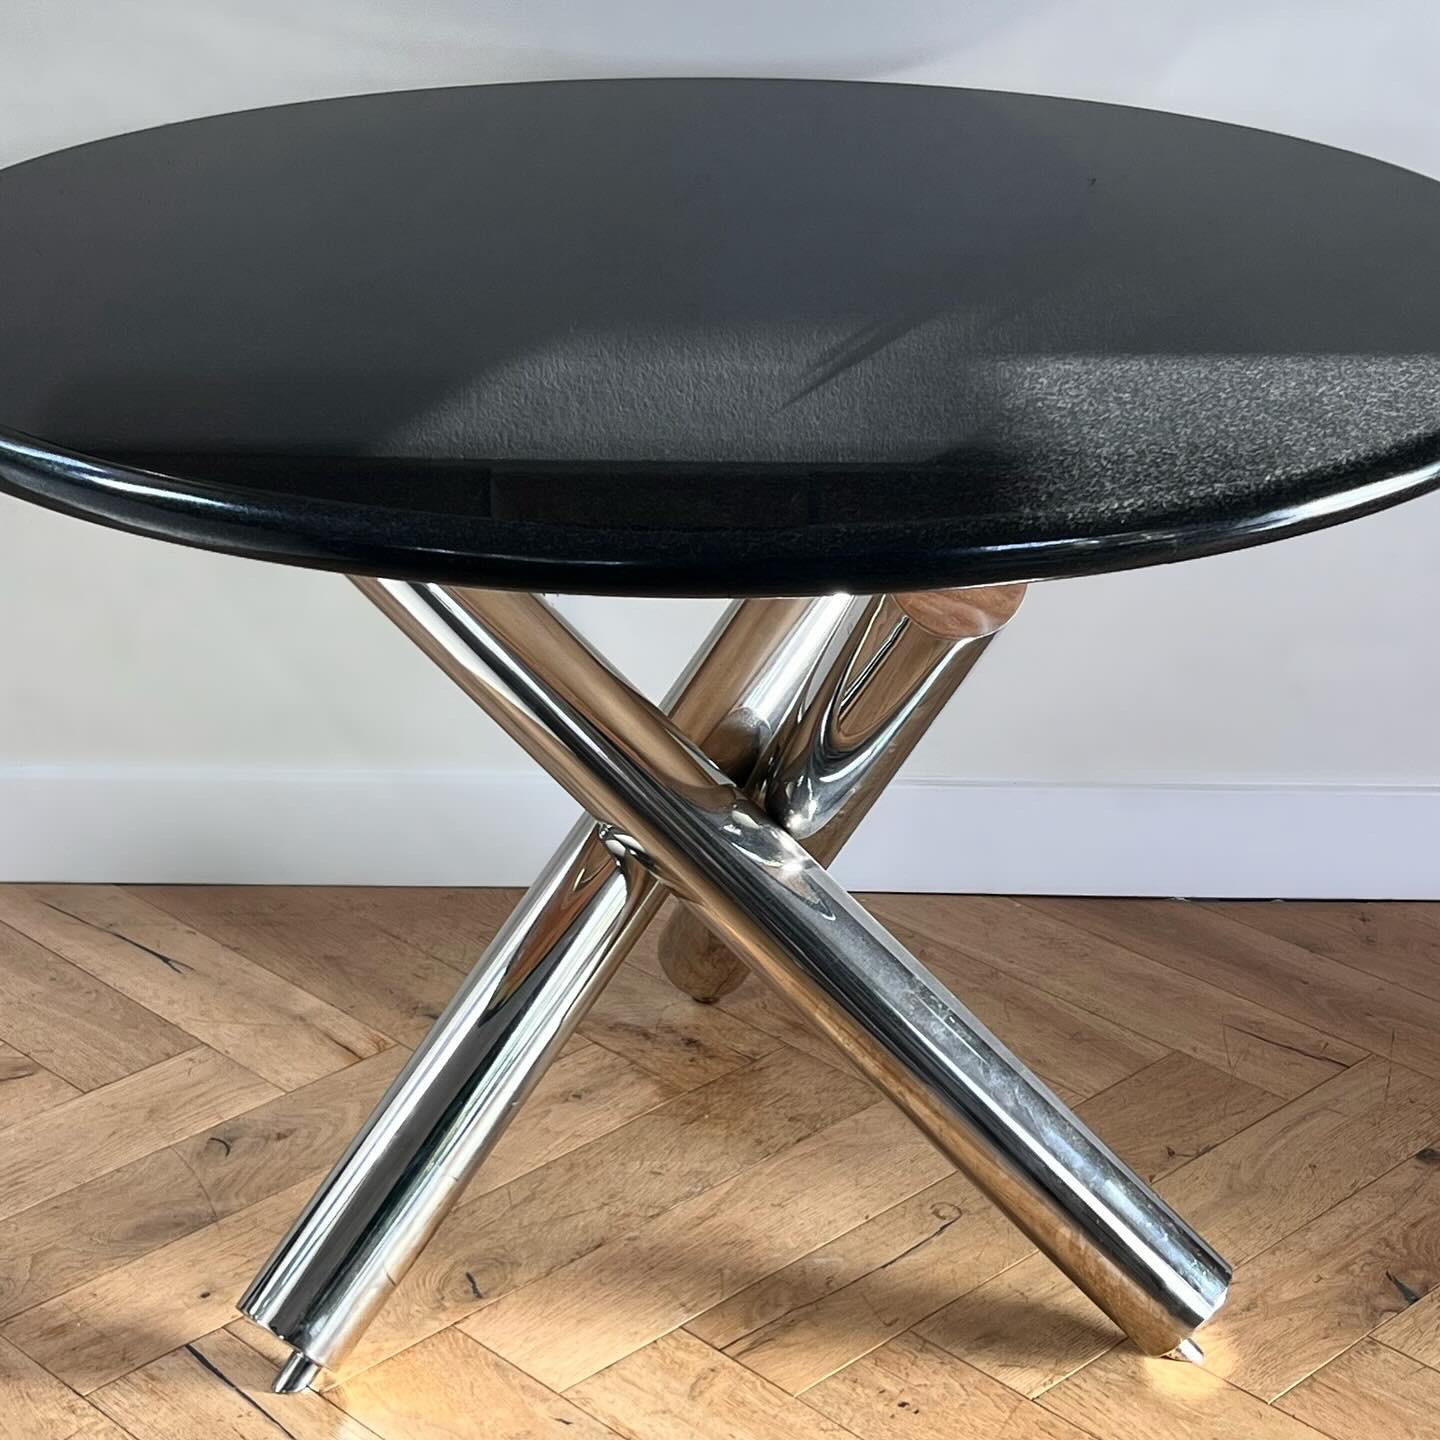 A postmodern circular dining - or entry - table, late 20th century. After J. Wade Beam for Brueton. Top is black granite; base is comprised of three crossed and fused chrome metal cylinders. Two pieces. Fabulous condition with little wear. Pick up